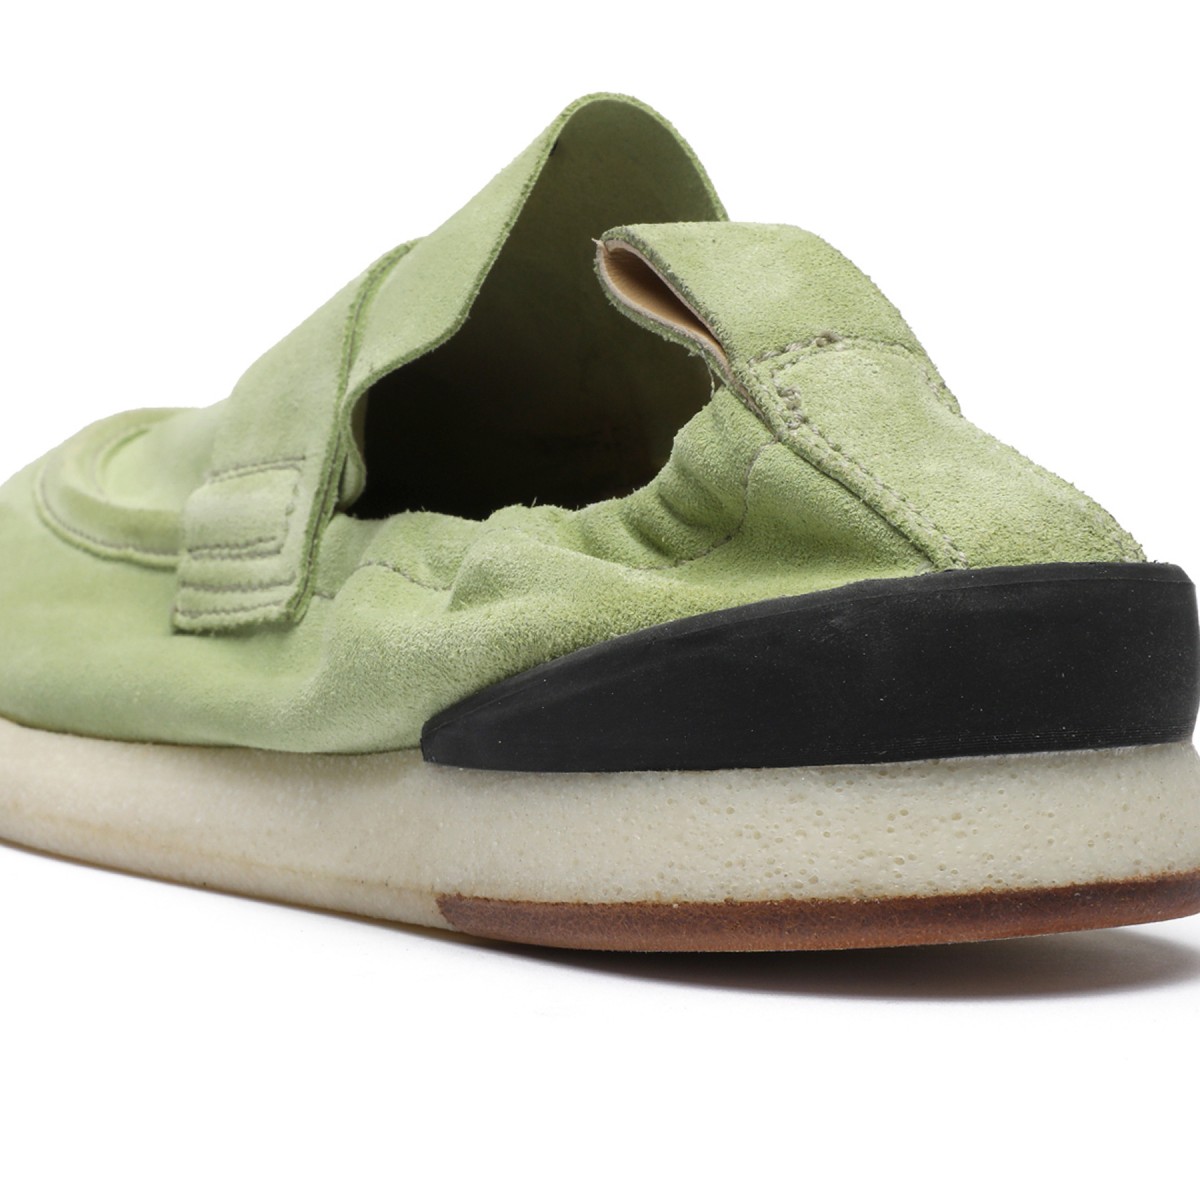 Light green suede loafers